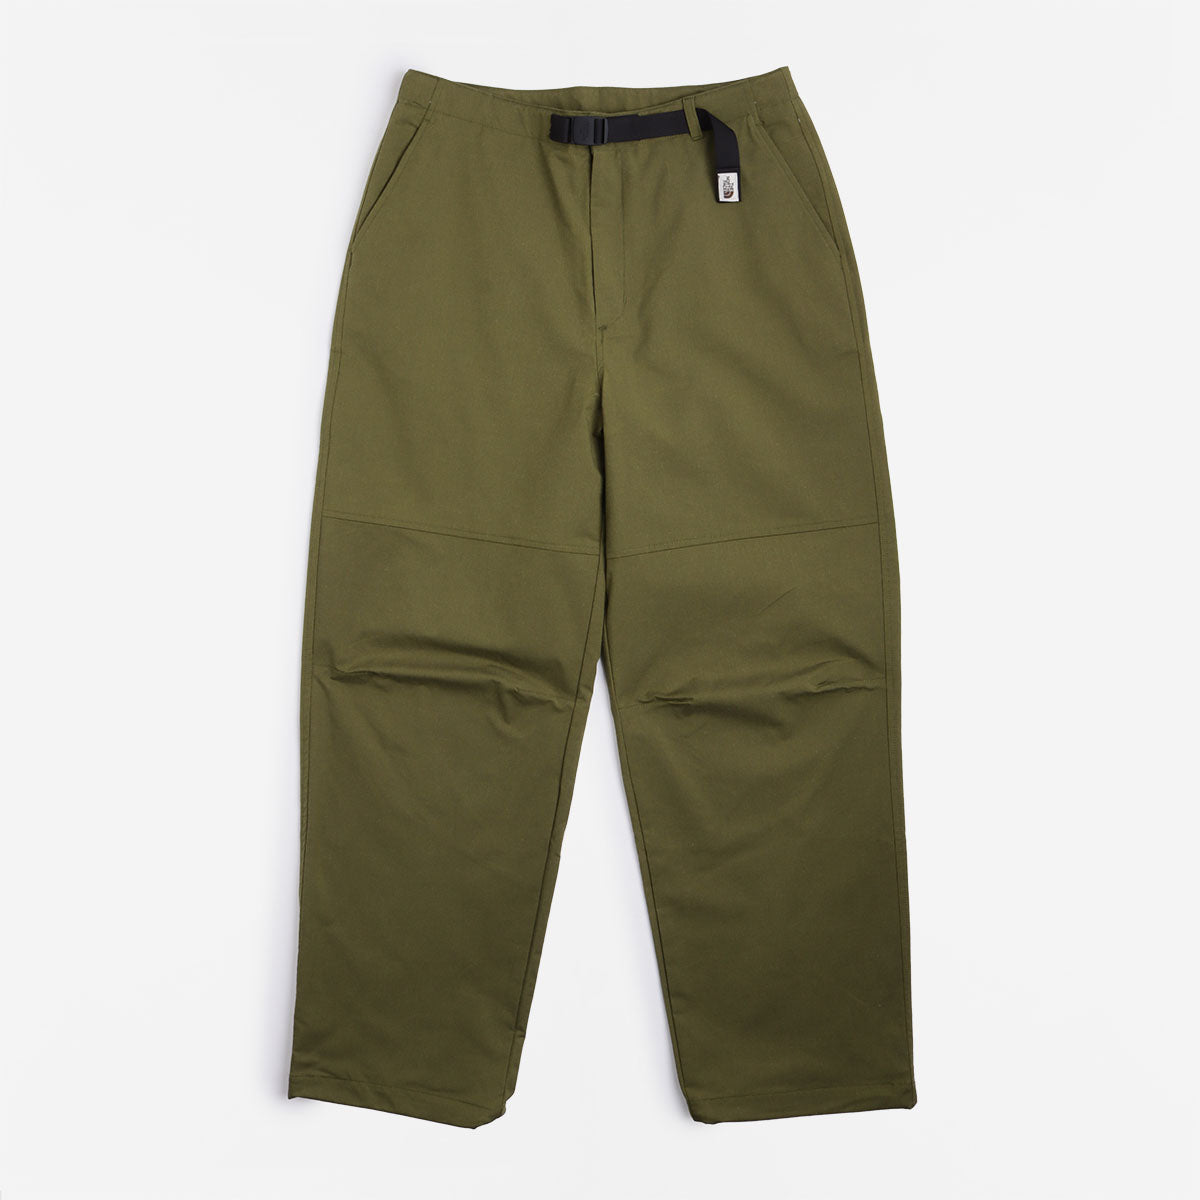 The North Face RMST MOUNTAIN PANT Black